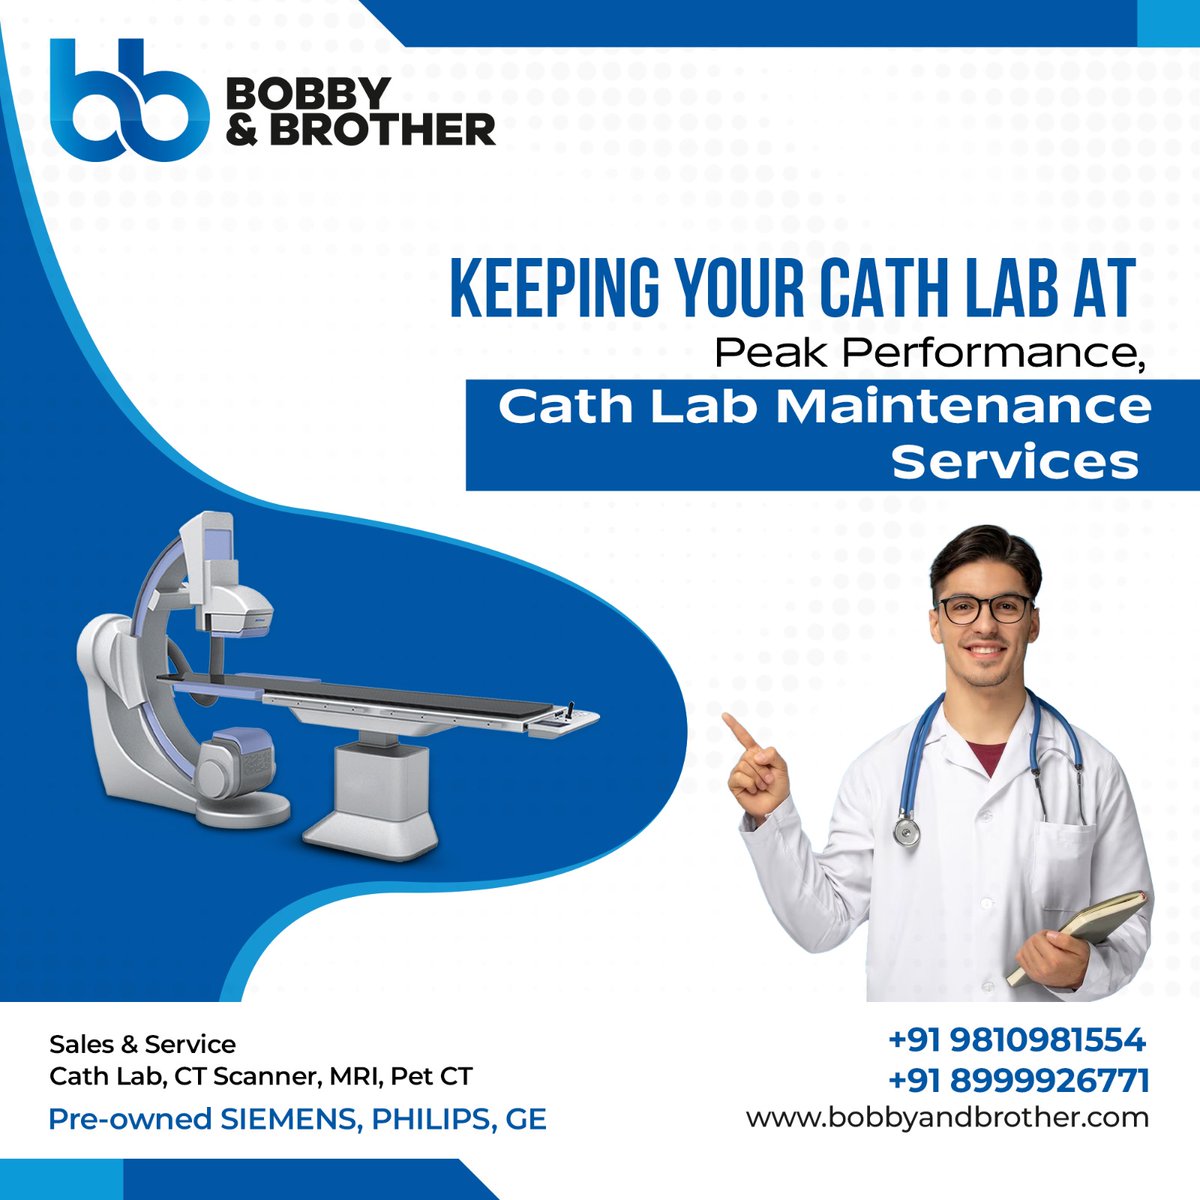 Keep your cath lab running smoothly with our maintenance service, offering routine checks and expert repairs for safe and efficient procedures.
#BobbyAndBrother #CathLab #CathLabTech #MedicalEquipment #HealthcareEquipment #HealthInnovation #CardiologyCare #MedicalIndustry #India